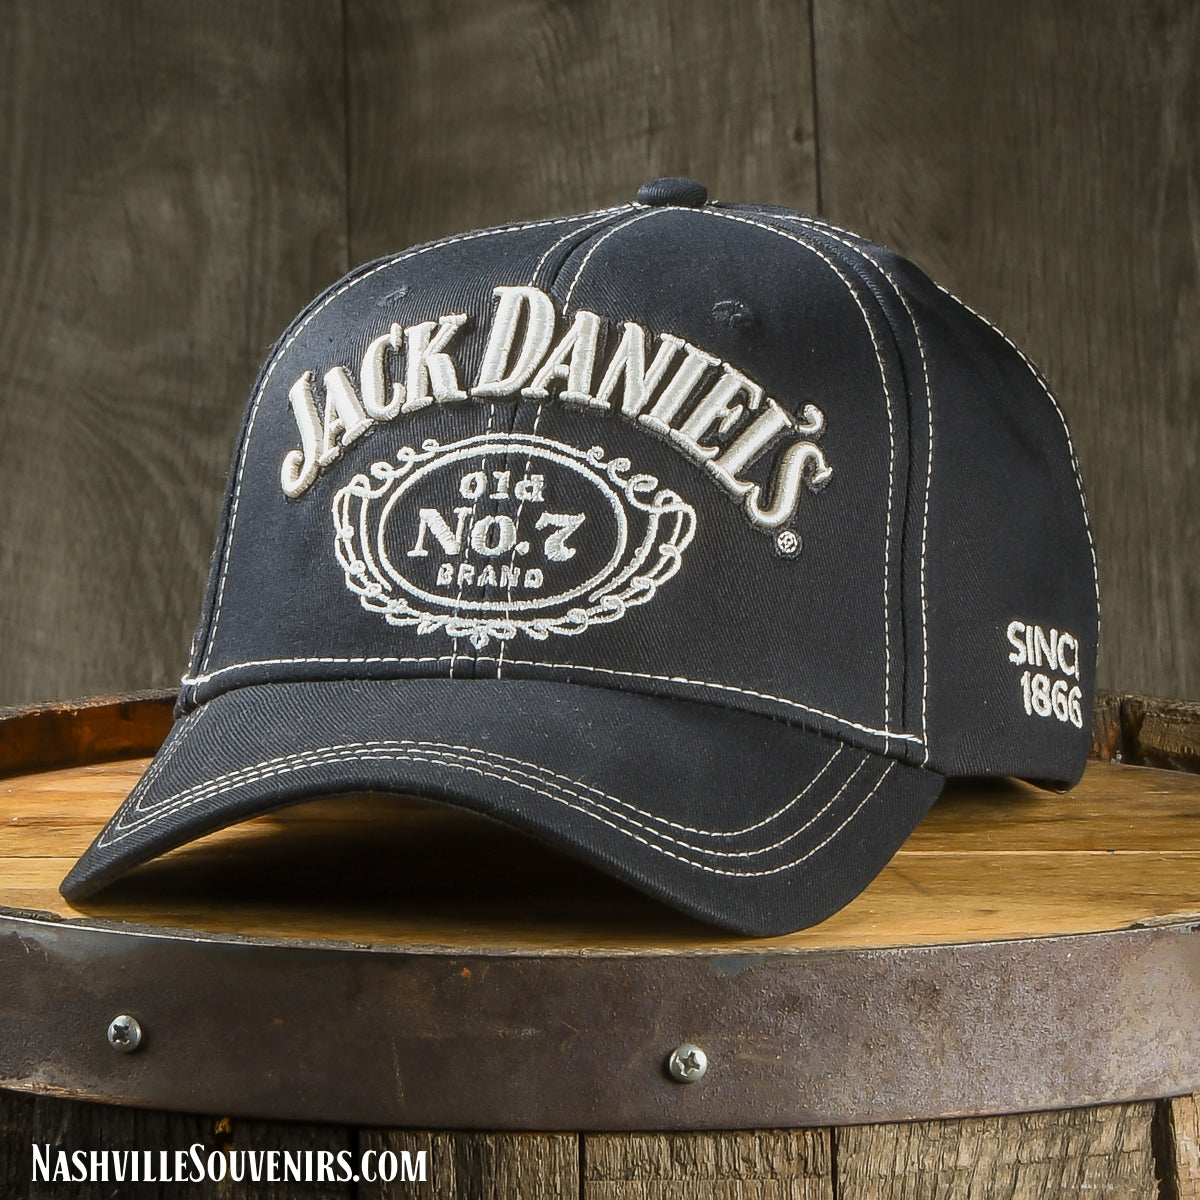 Grab one of these Jack Daniels Reverse Stitch Saloon hat. One size fits most. FREE SHIPPING on U.S. orders over $75!